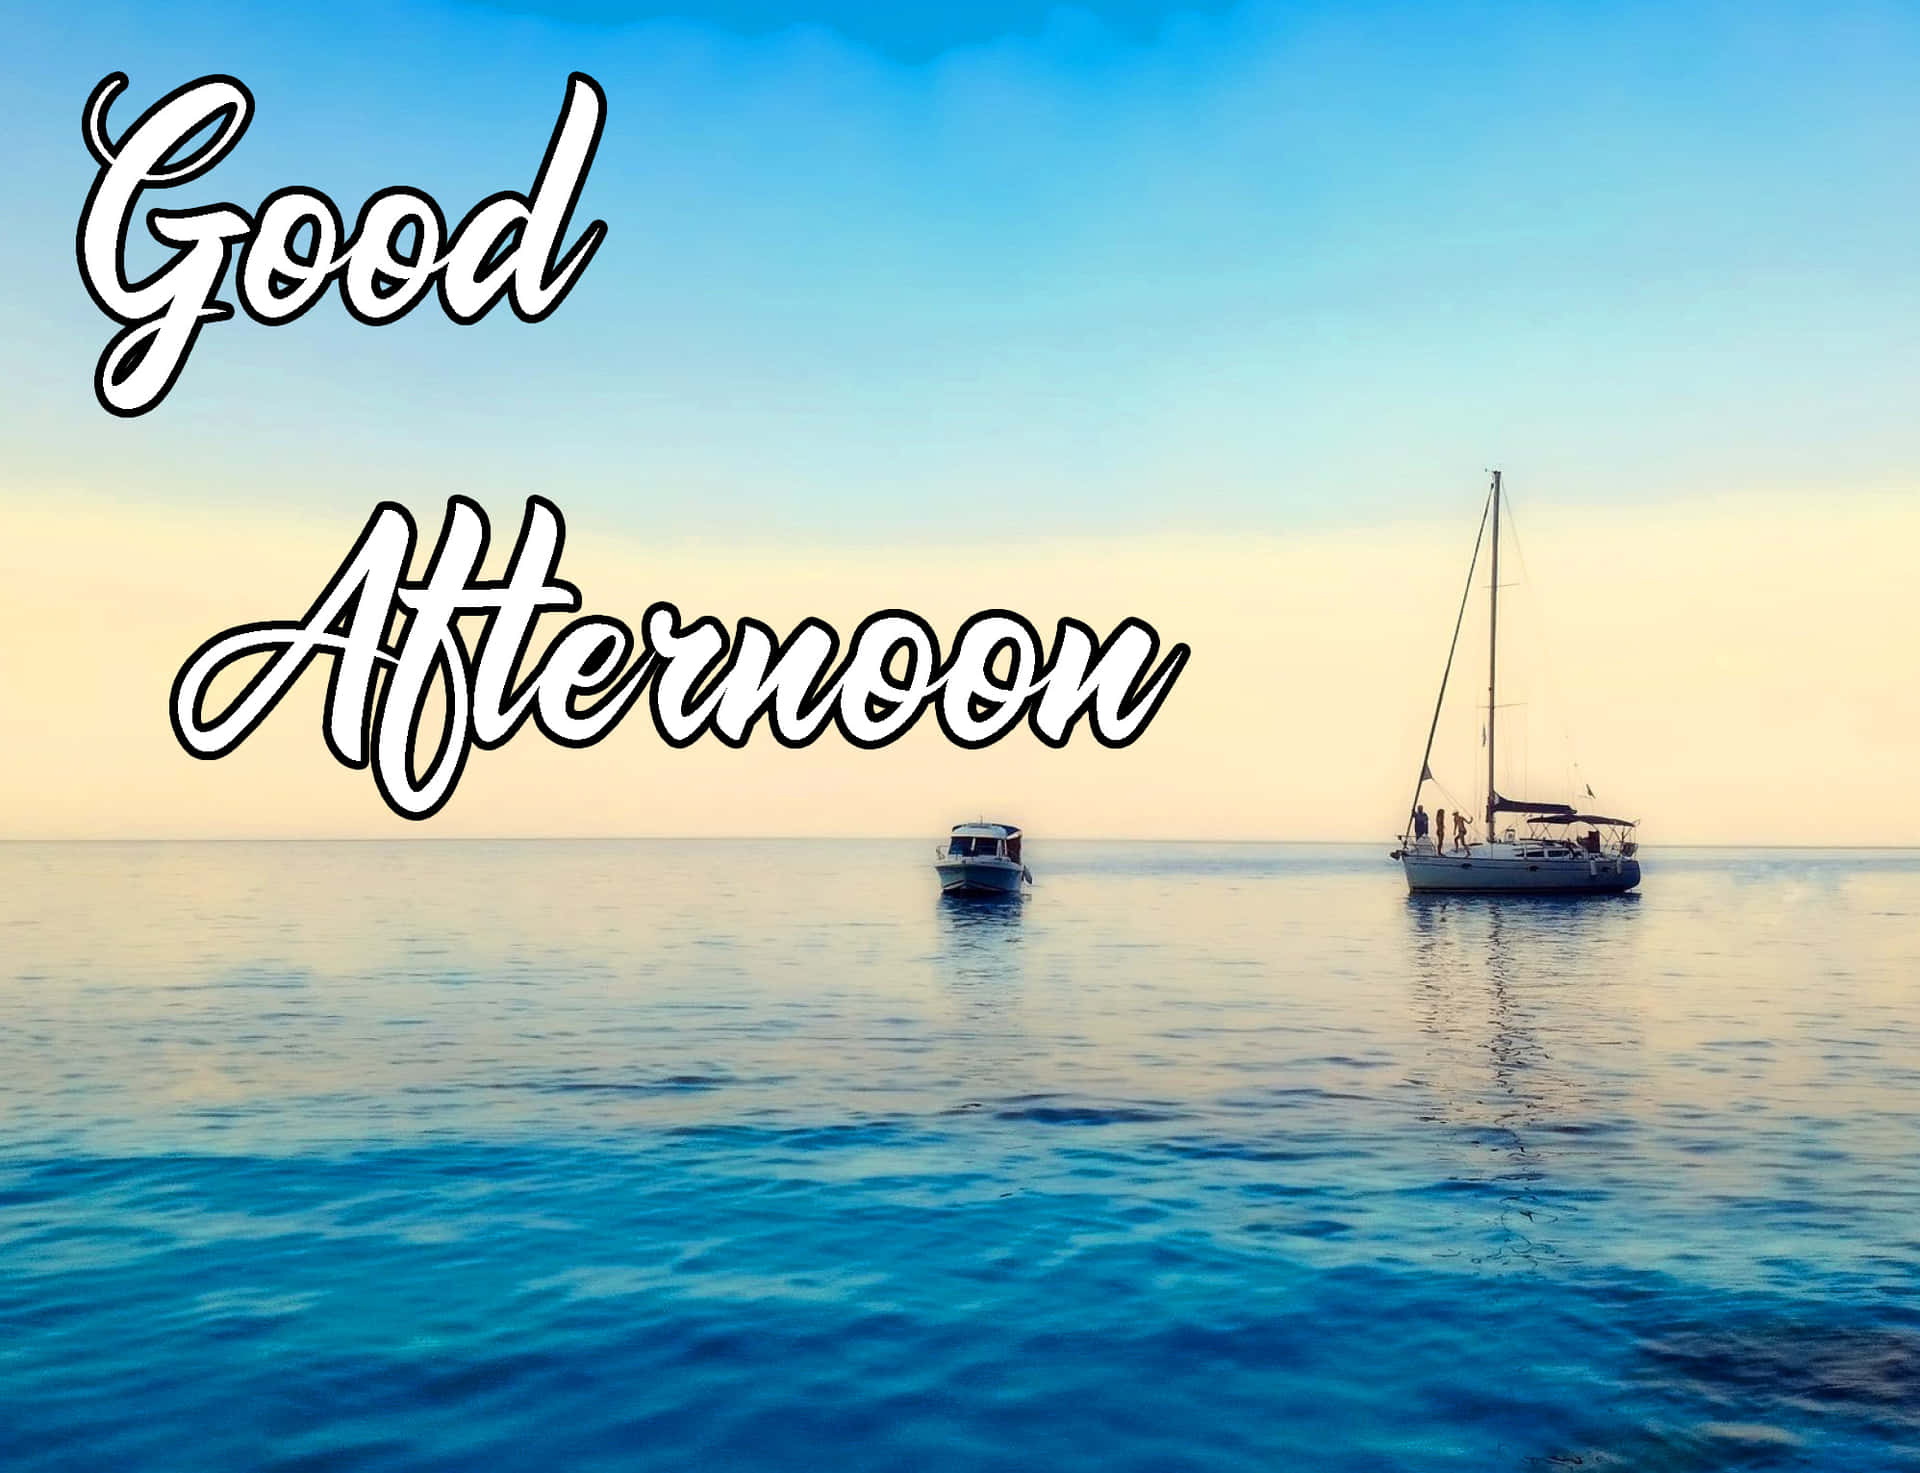 Good Afternoon Ocean View Picture